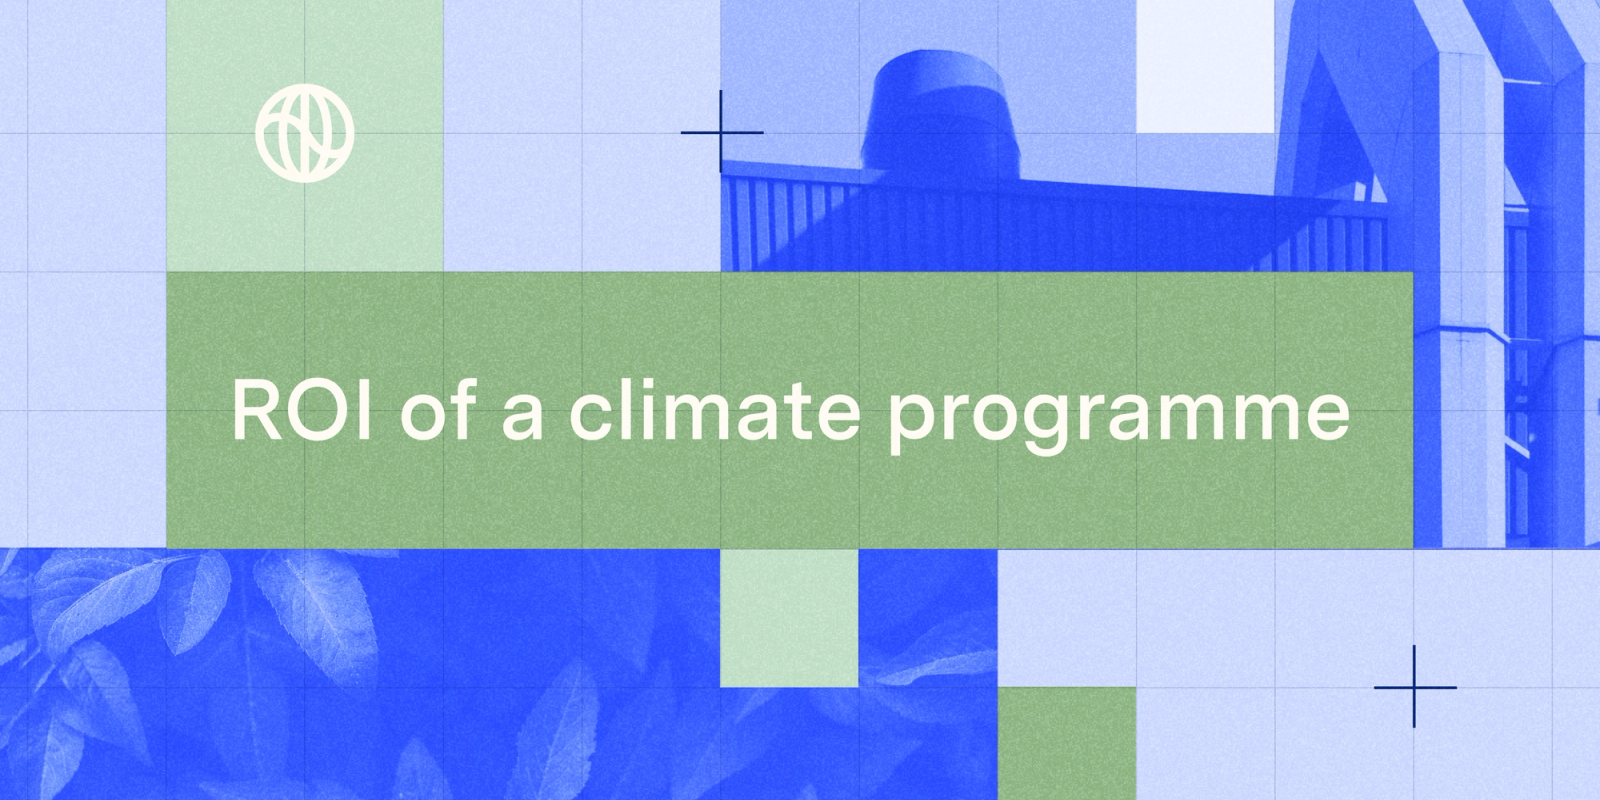 The ROI of a Climate Program